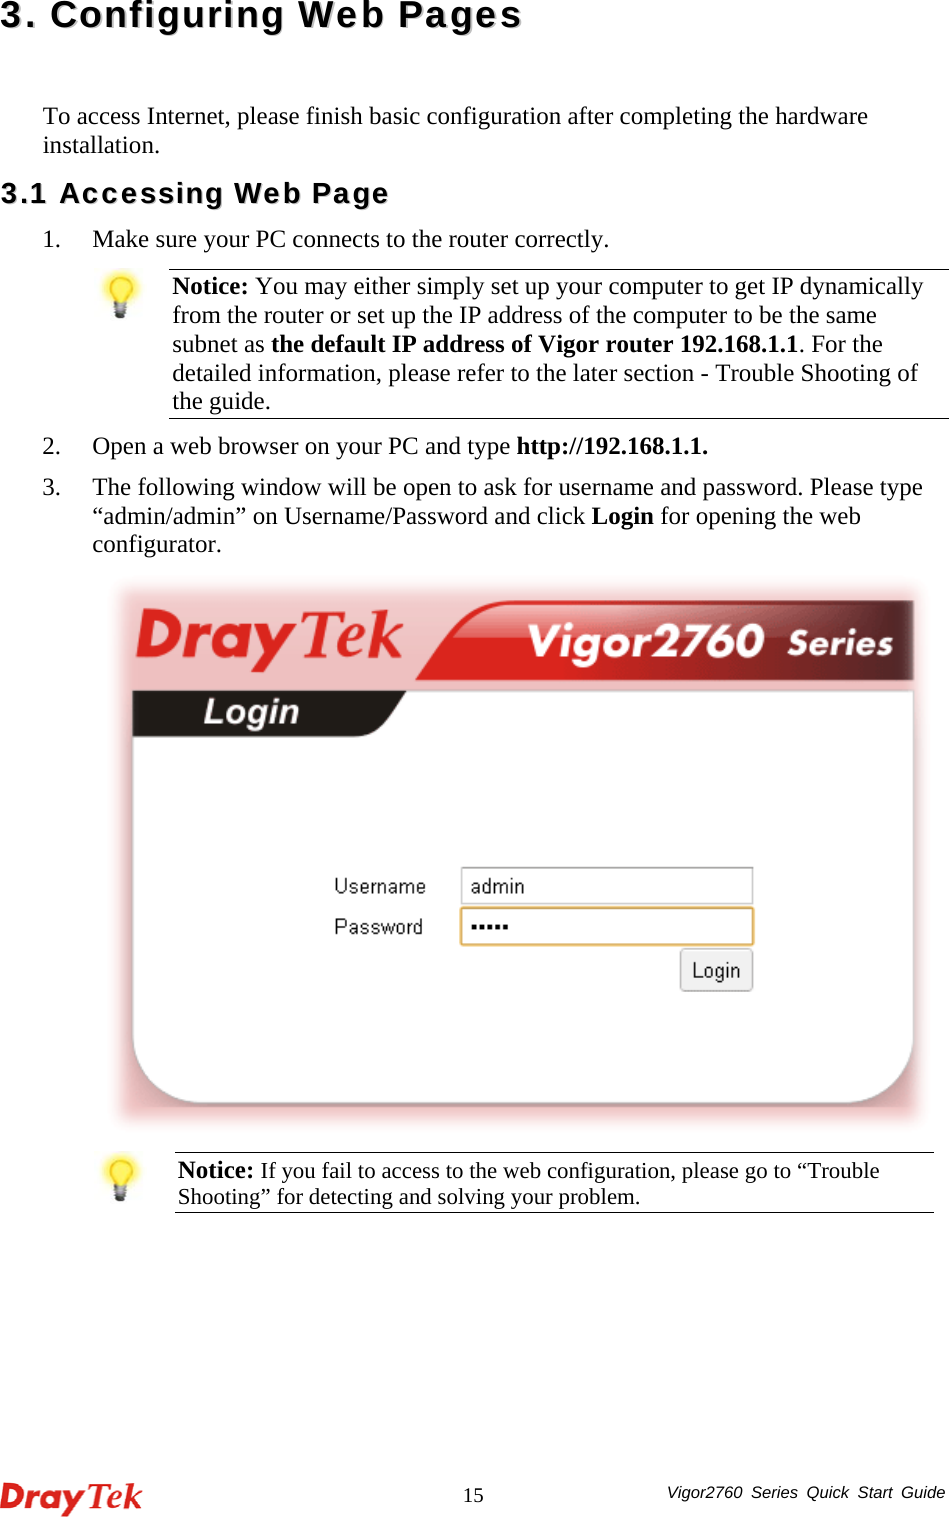  Vigor2760 Series Quick Start Guide 1533..  CCoonnffiigguurriinngg  WWeebb  PPaaggeess  To access Internet, please finish basic configuration after completing the hardware installation.  33..11  AAcccceessssiinngg  WWeebb  PPaaggee  1. Make sure your PC connects to the router correctly.    Notice: You may either simply set up your computer to get IP dynamically from the router or set up the IP address of the computer to be the same subnet as the default IP address of Vigor router 192.168.1.1. For the detailed information, please refer to the later section - Trouble Shooting of the guide. 2. Open a web browser on your PC and type http://192.168.1.1.   3. The following window will be open to ask for username and password. Please type “admin/admin” on Username/Password and click Login for opening the web configurator.   Notice: If you fail to access to the web configuration, please go to “Trouble Shooting” for detecting and solving your problem.  